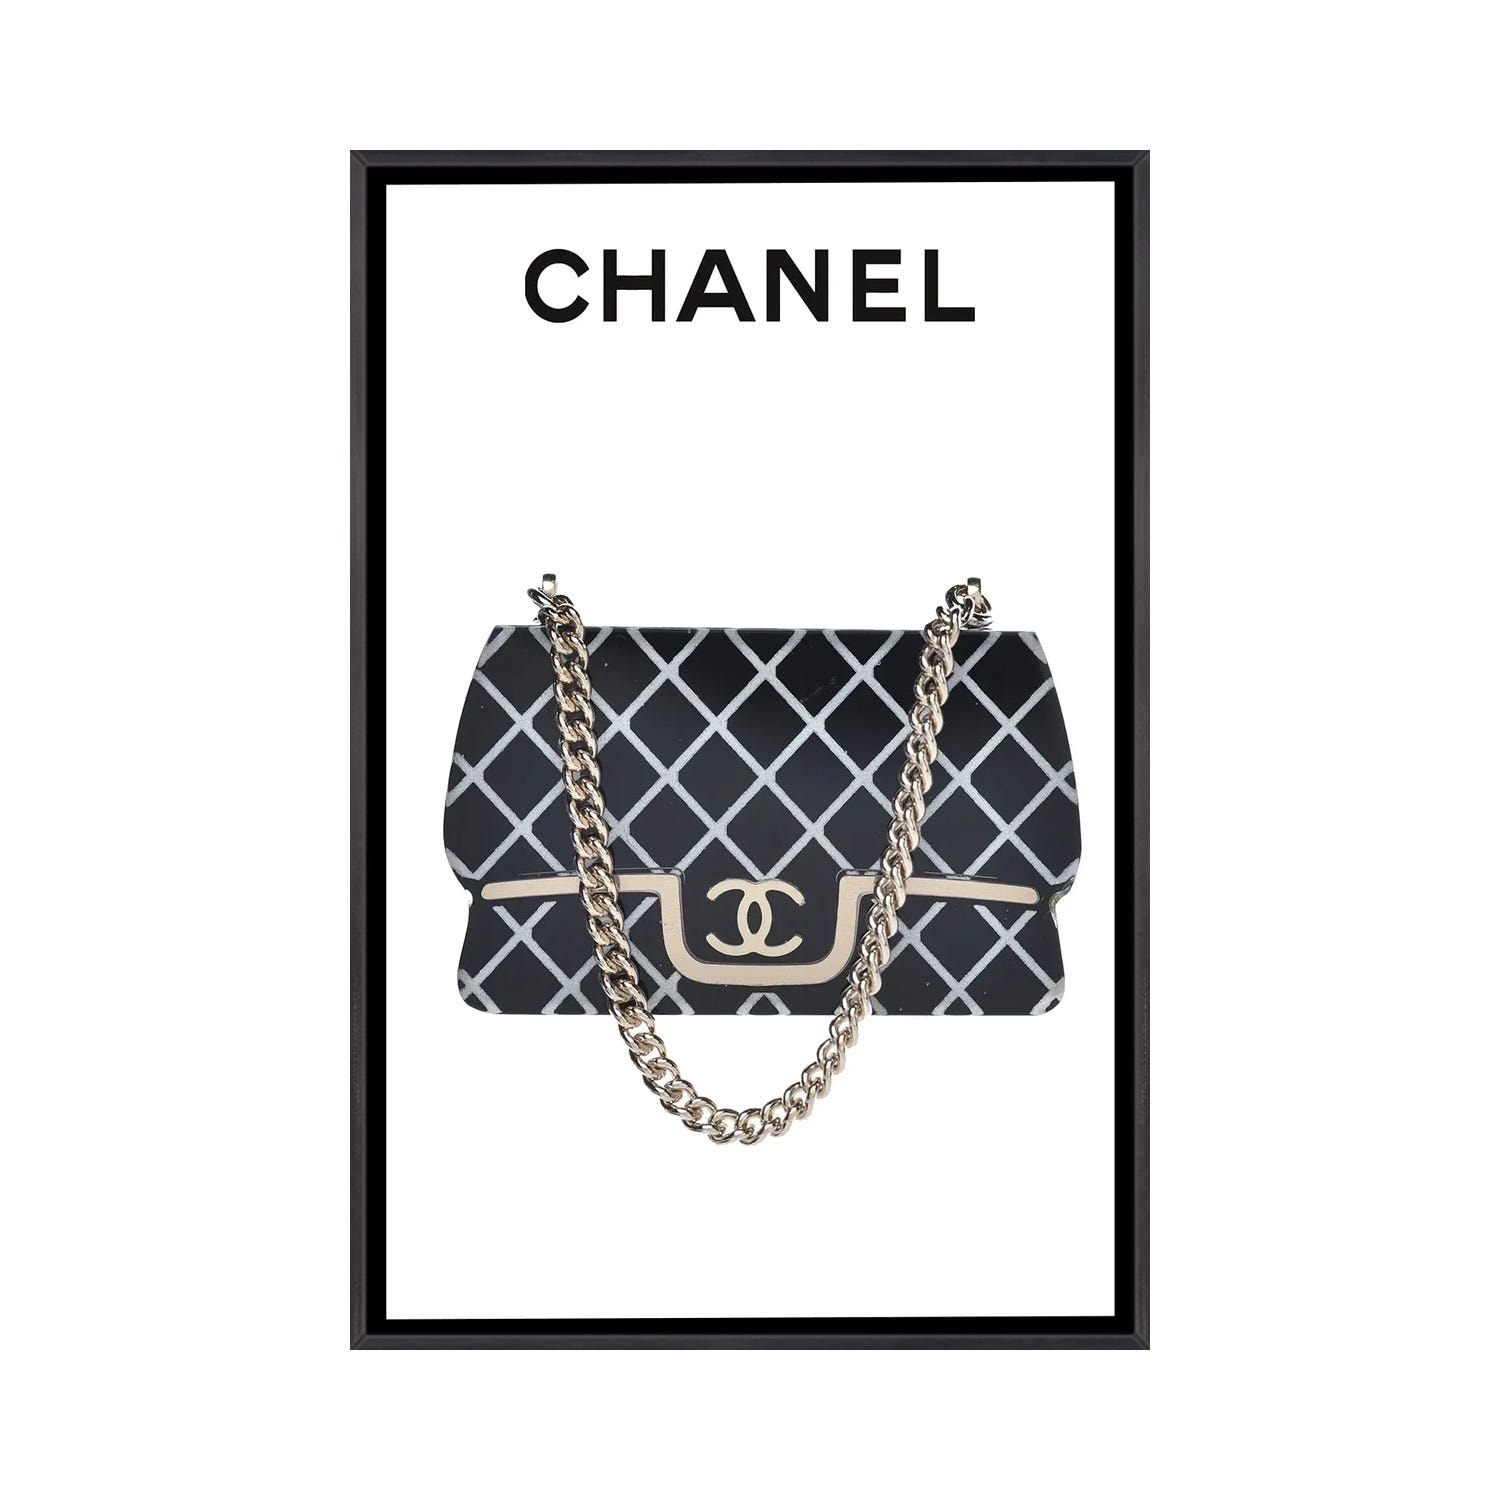 Framed Canvas Art (Champagne) - Chanel Bag by Julie Schreiber ( Fashion > Fashion Accessories > Bags & Purses art) - 26x18 in